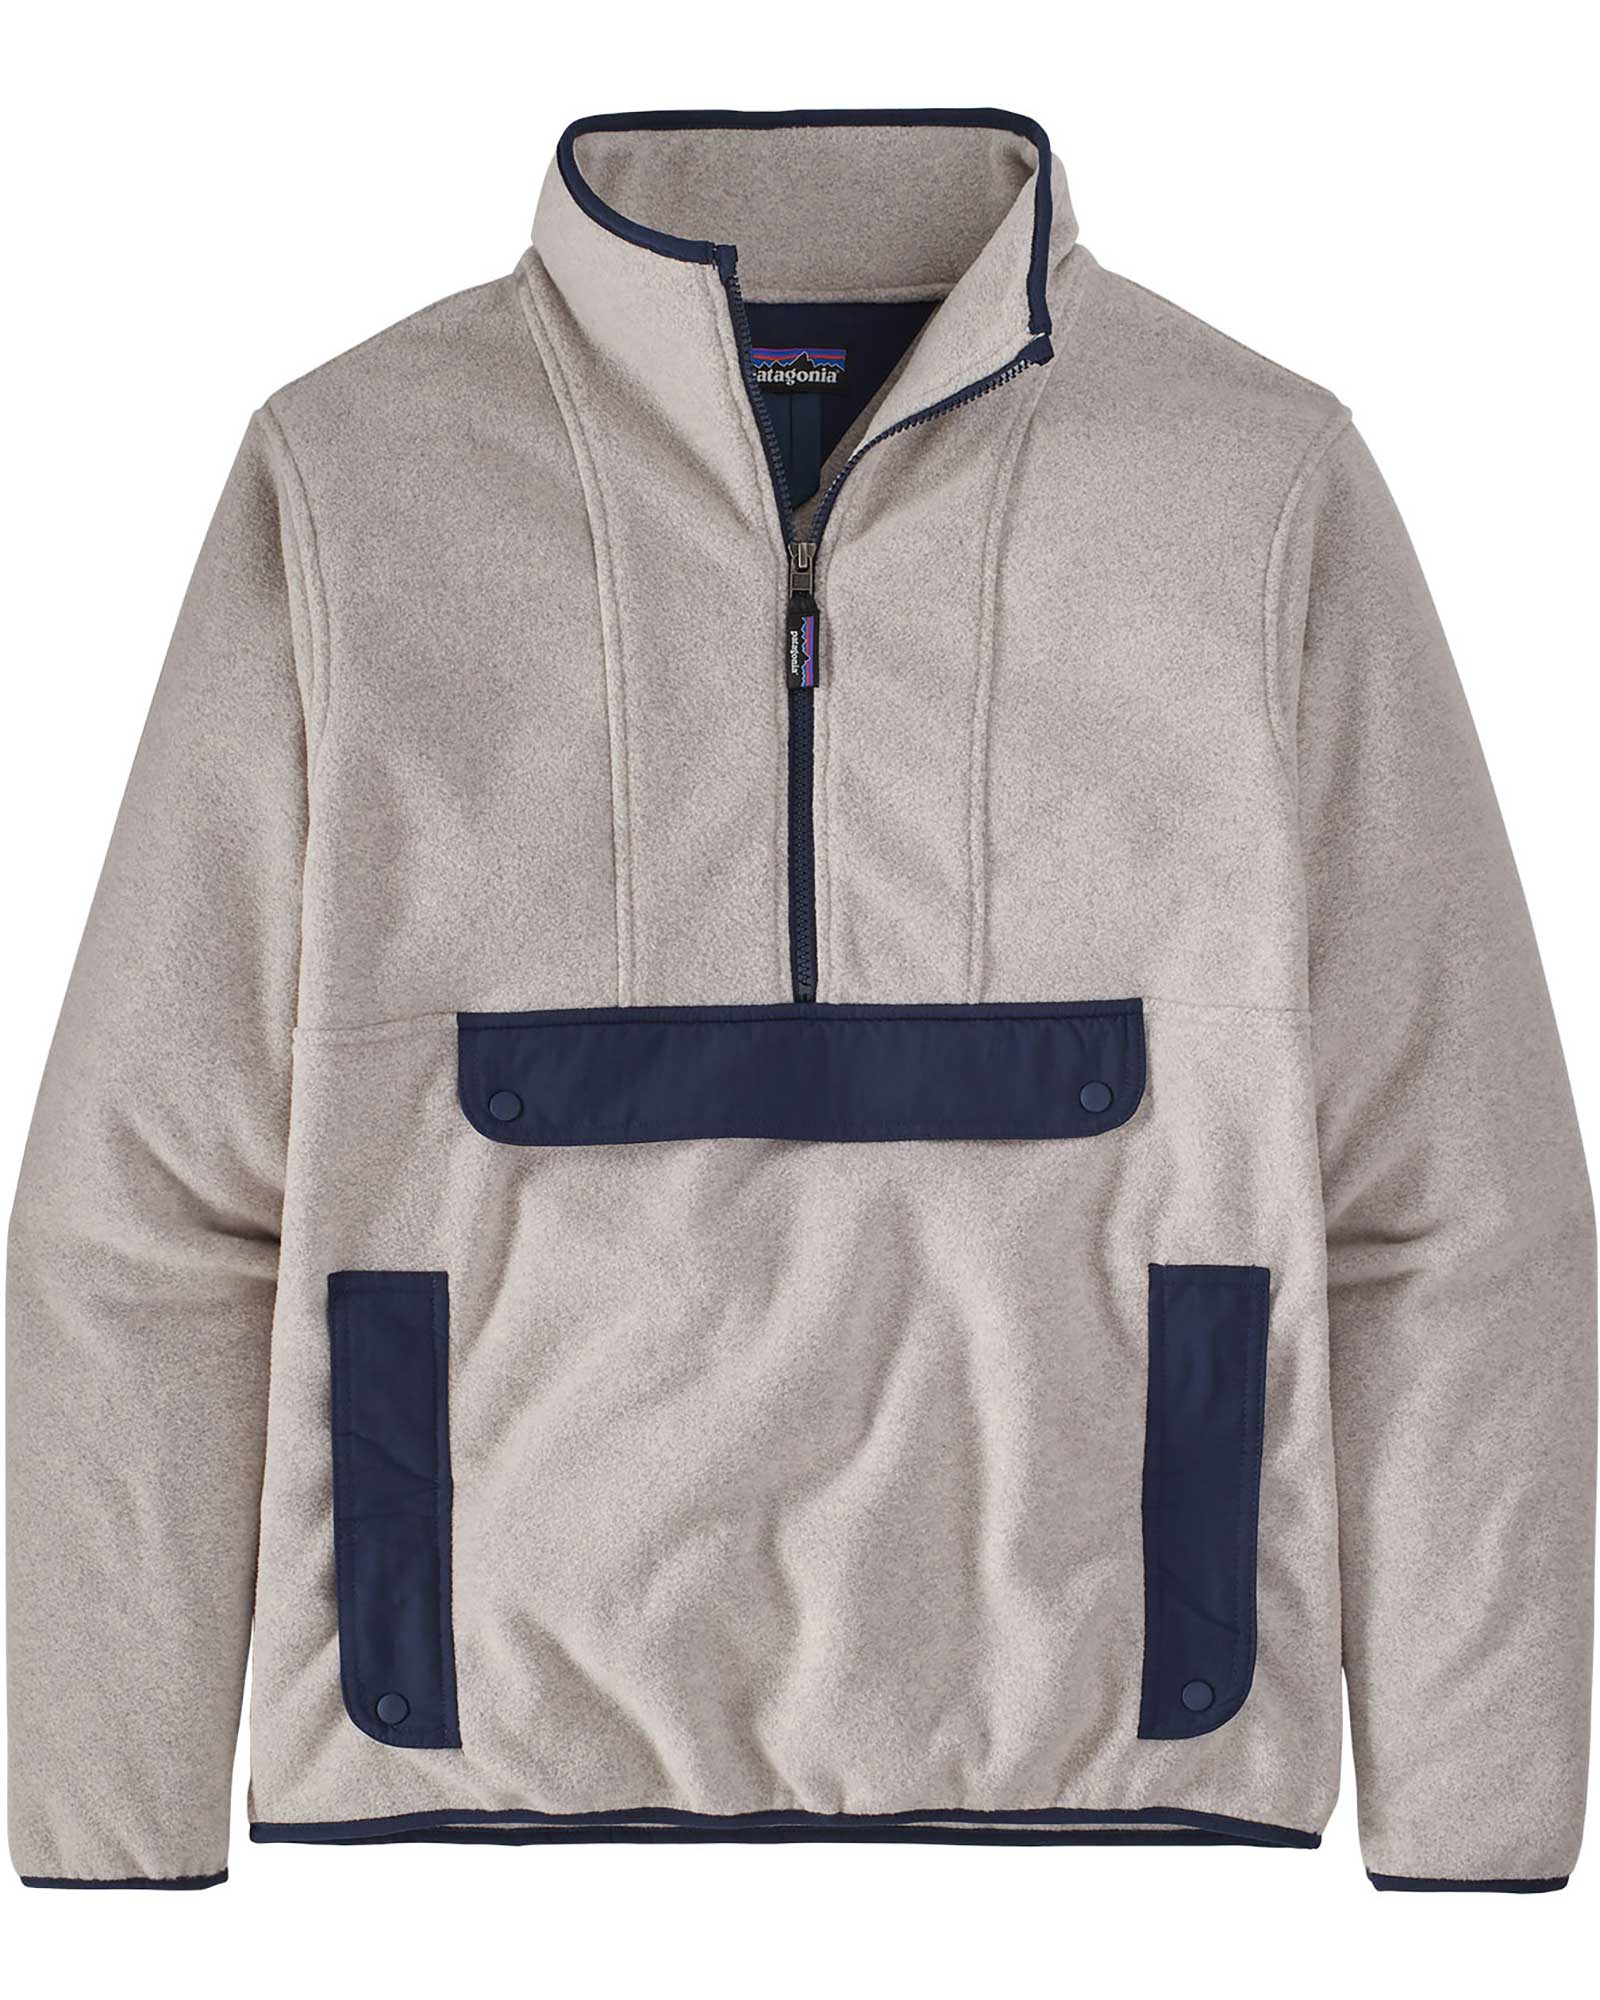 Product image of Patagonia Synchilla Men's Anorak